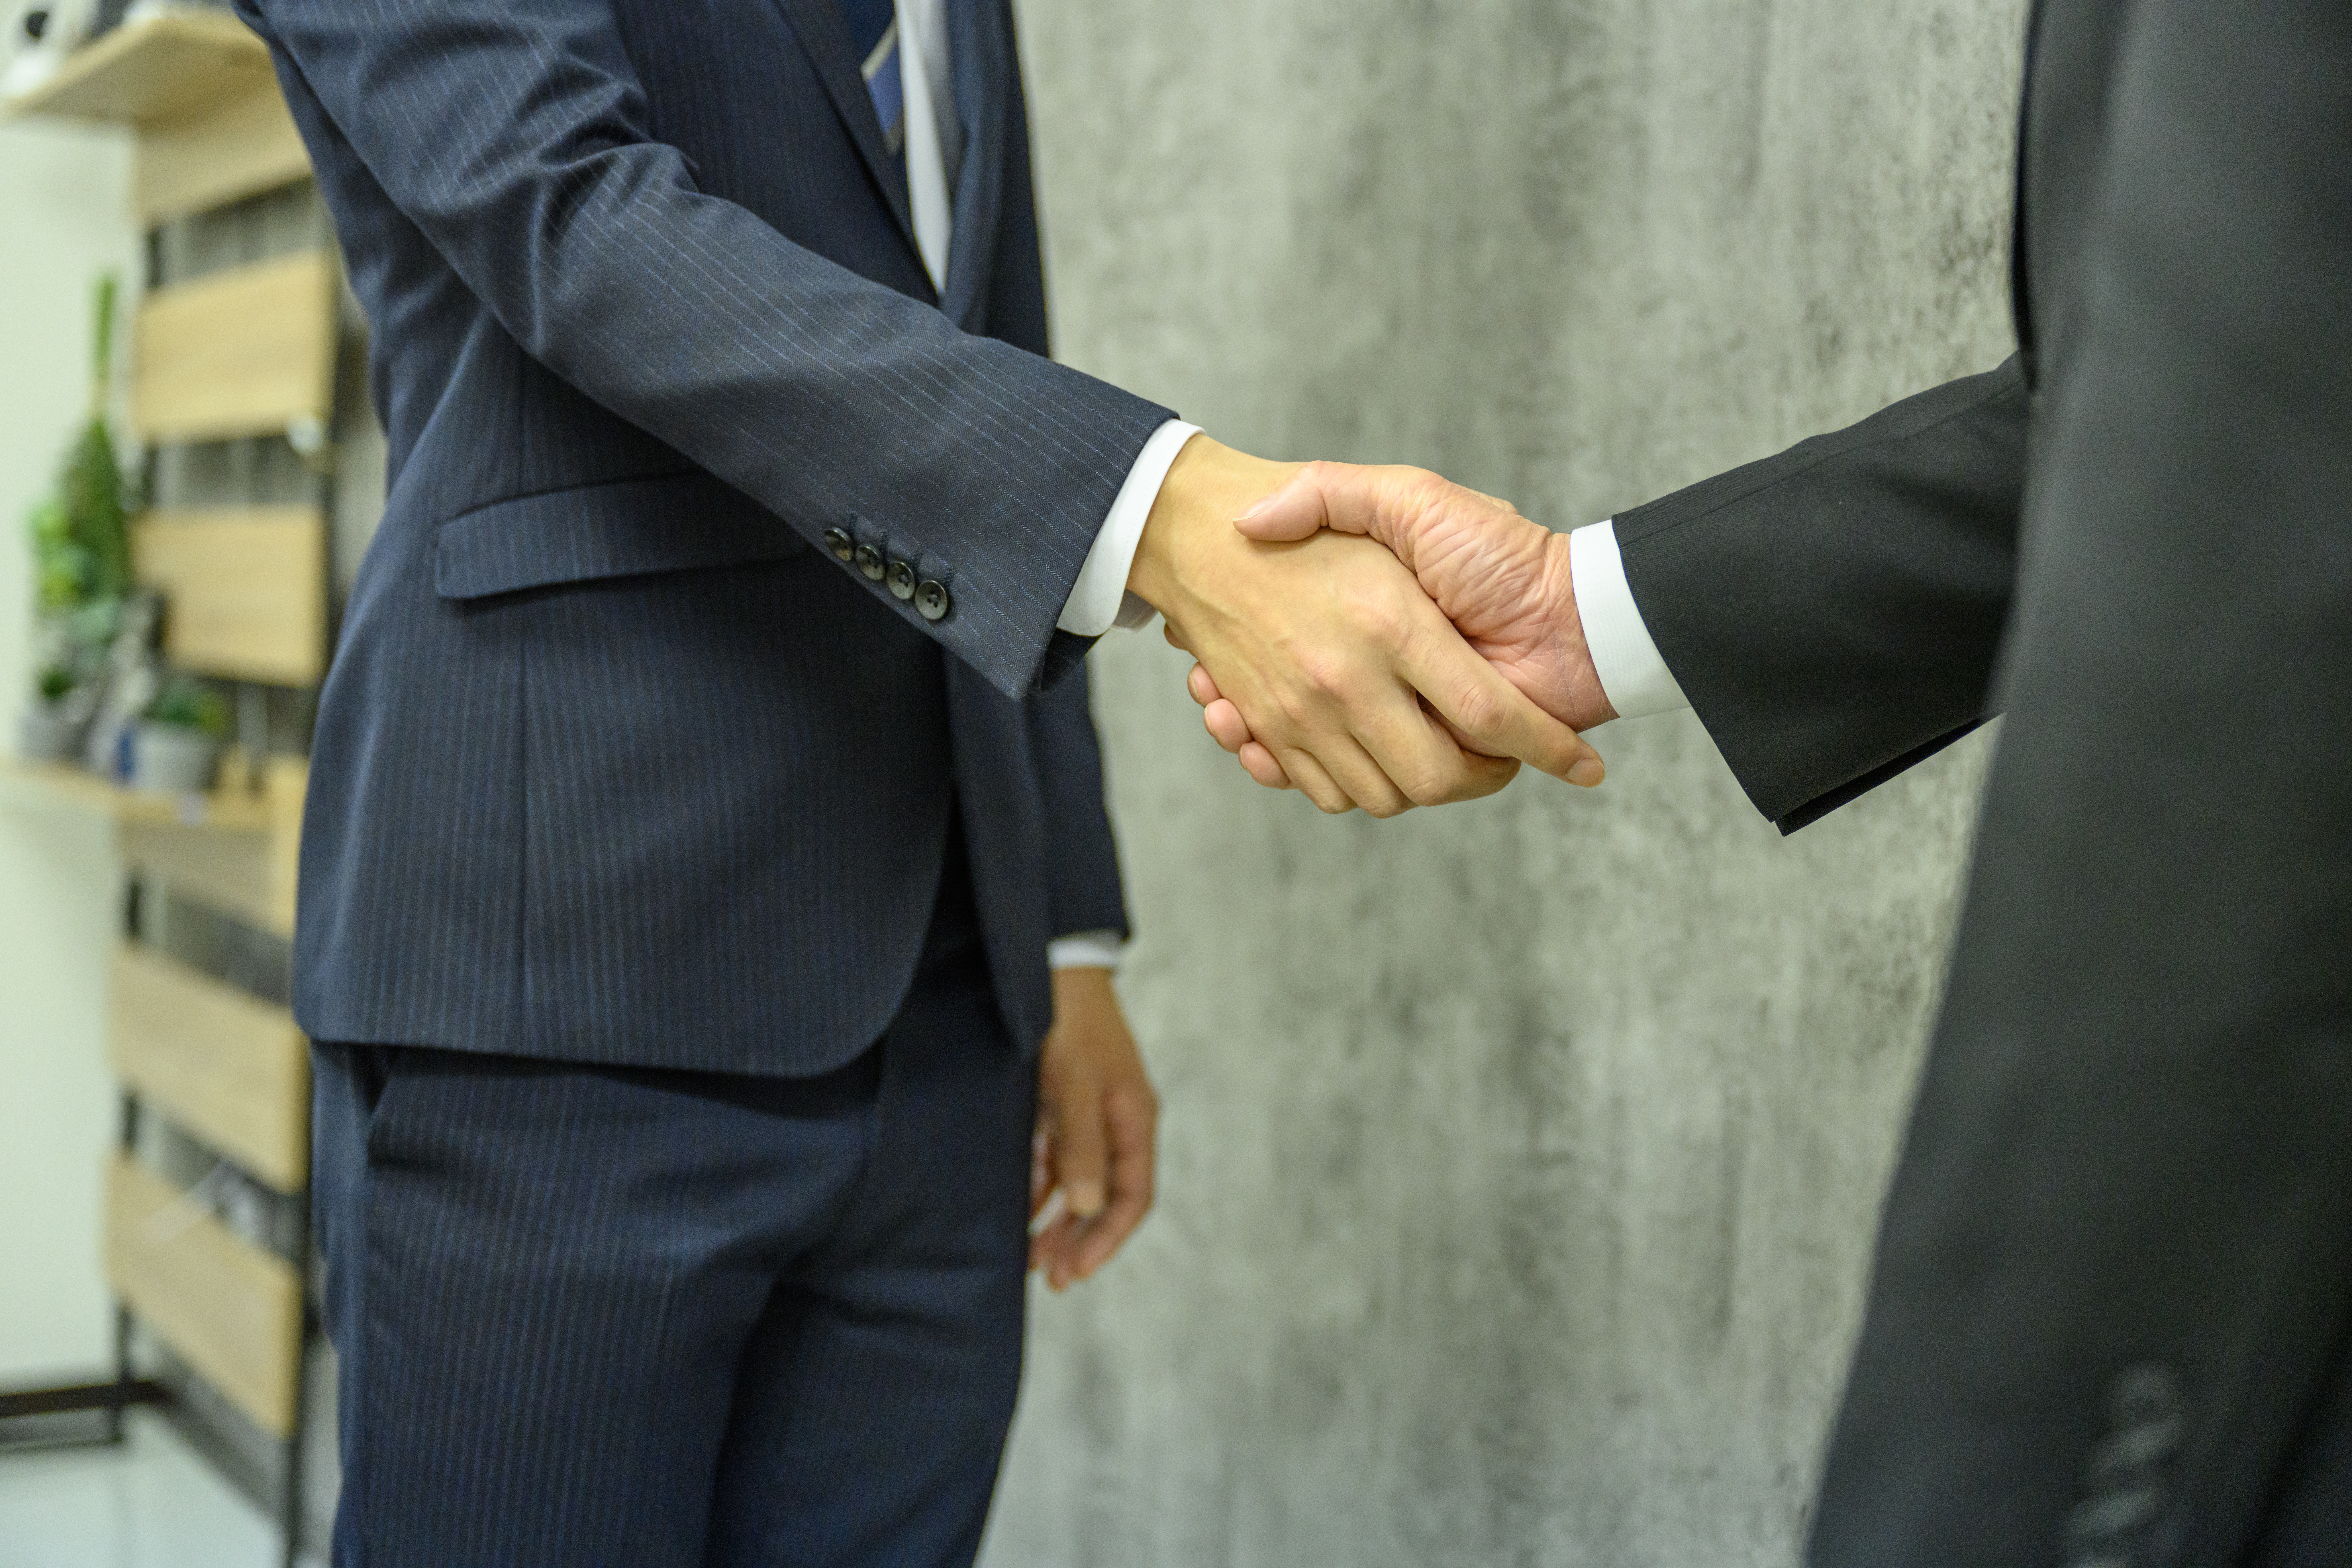 Two people dressed in suits shake hands.